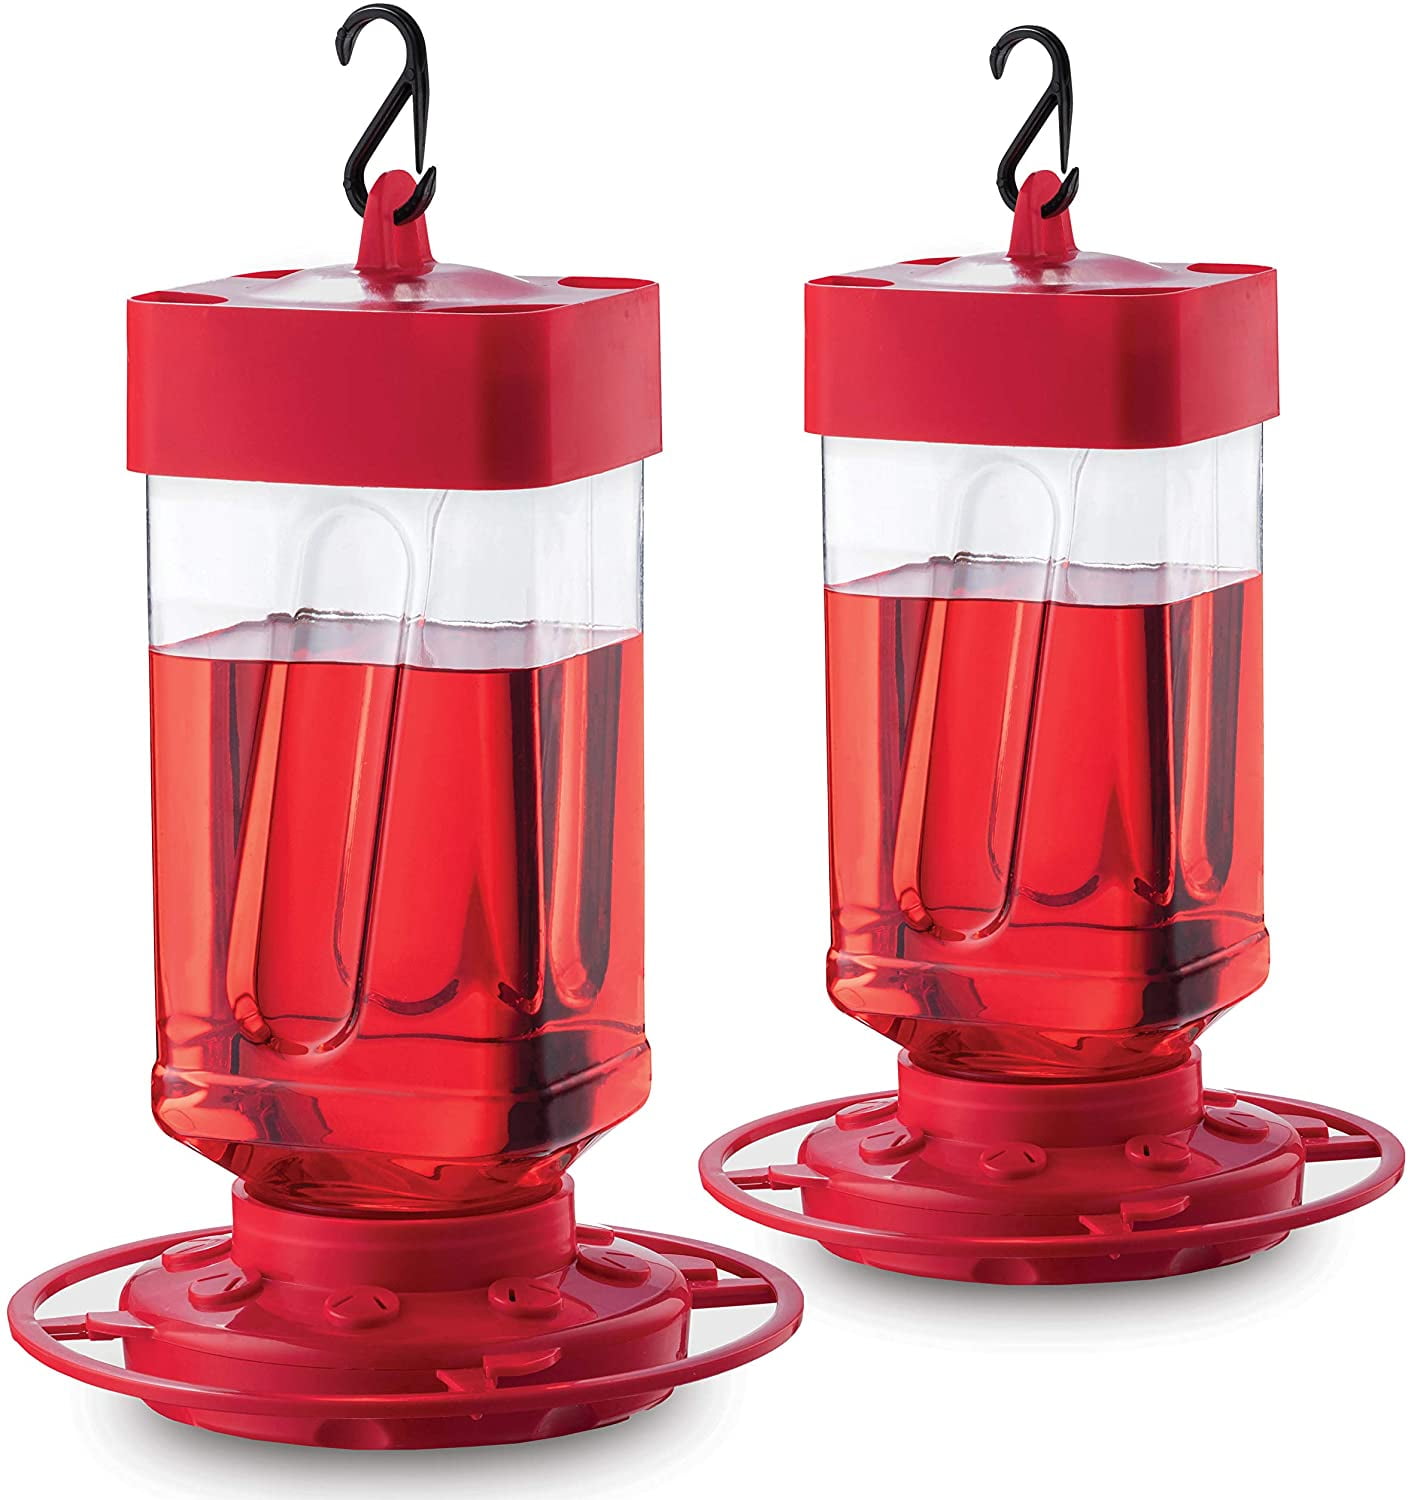 Hummingbird Feeder Circular Perch with 8 Feeding Ports/Wide Mouth for Easy Filling/2 Part Base for Easy Cleaning 30 oz Plastic Hummingbird Feeders for Outdoors Humming Bird Feeders